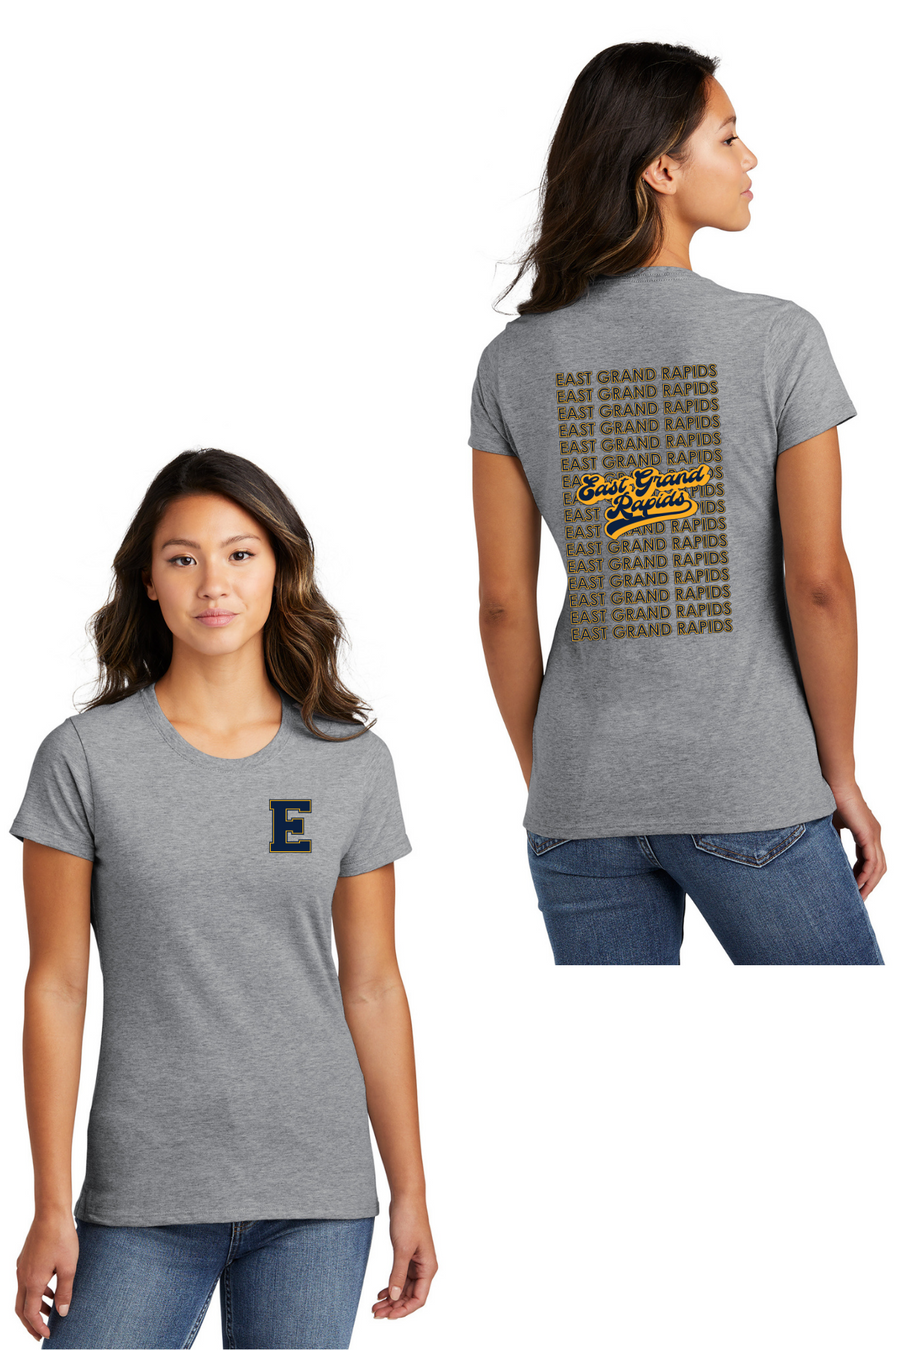 Wealthy Elementary Spirit Wear 2023-24-Port and Co Ladies Favorite Shirt